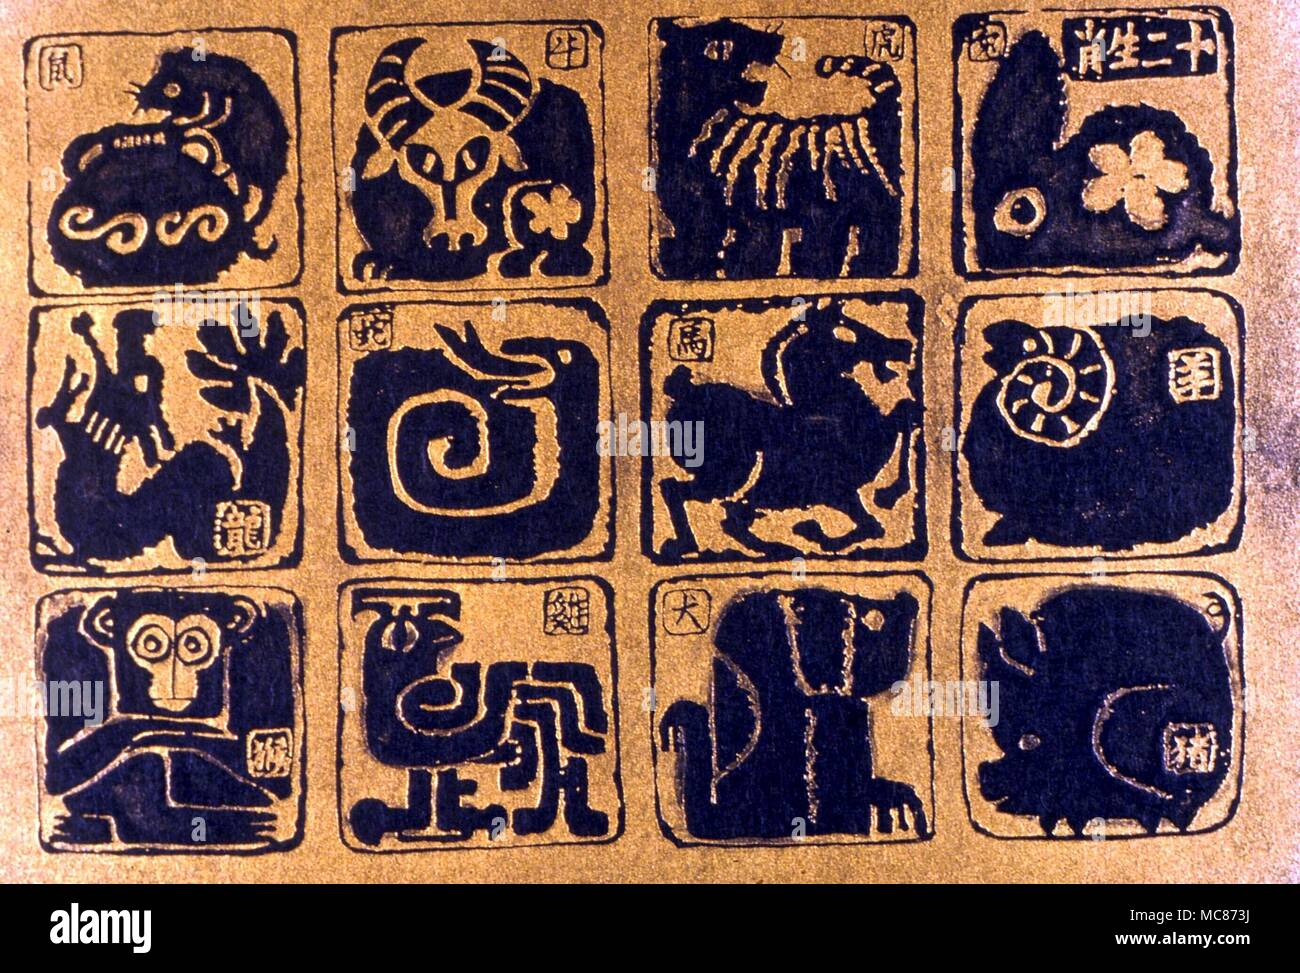 ANIMALS - The snake is one of the 12 images of the traditional Chinese zodiac, and finds no correspondence in the Western zodiacal imagery. Chinese print - private collection Stock Photo